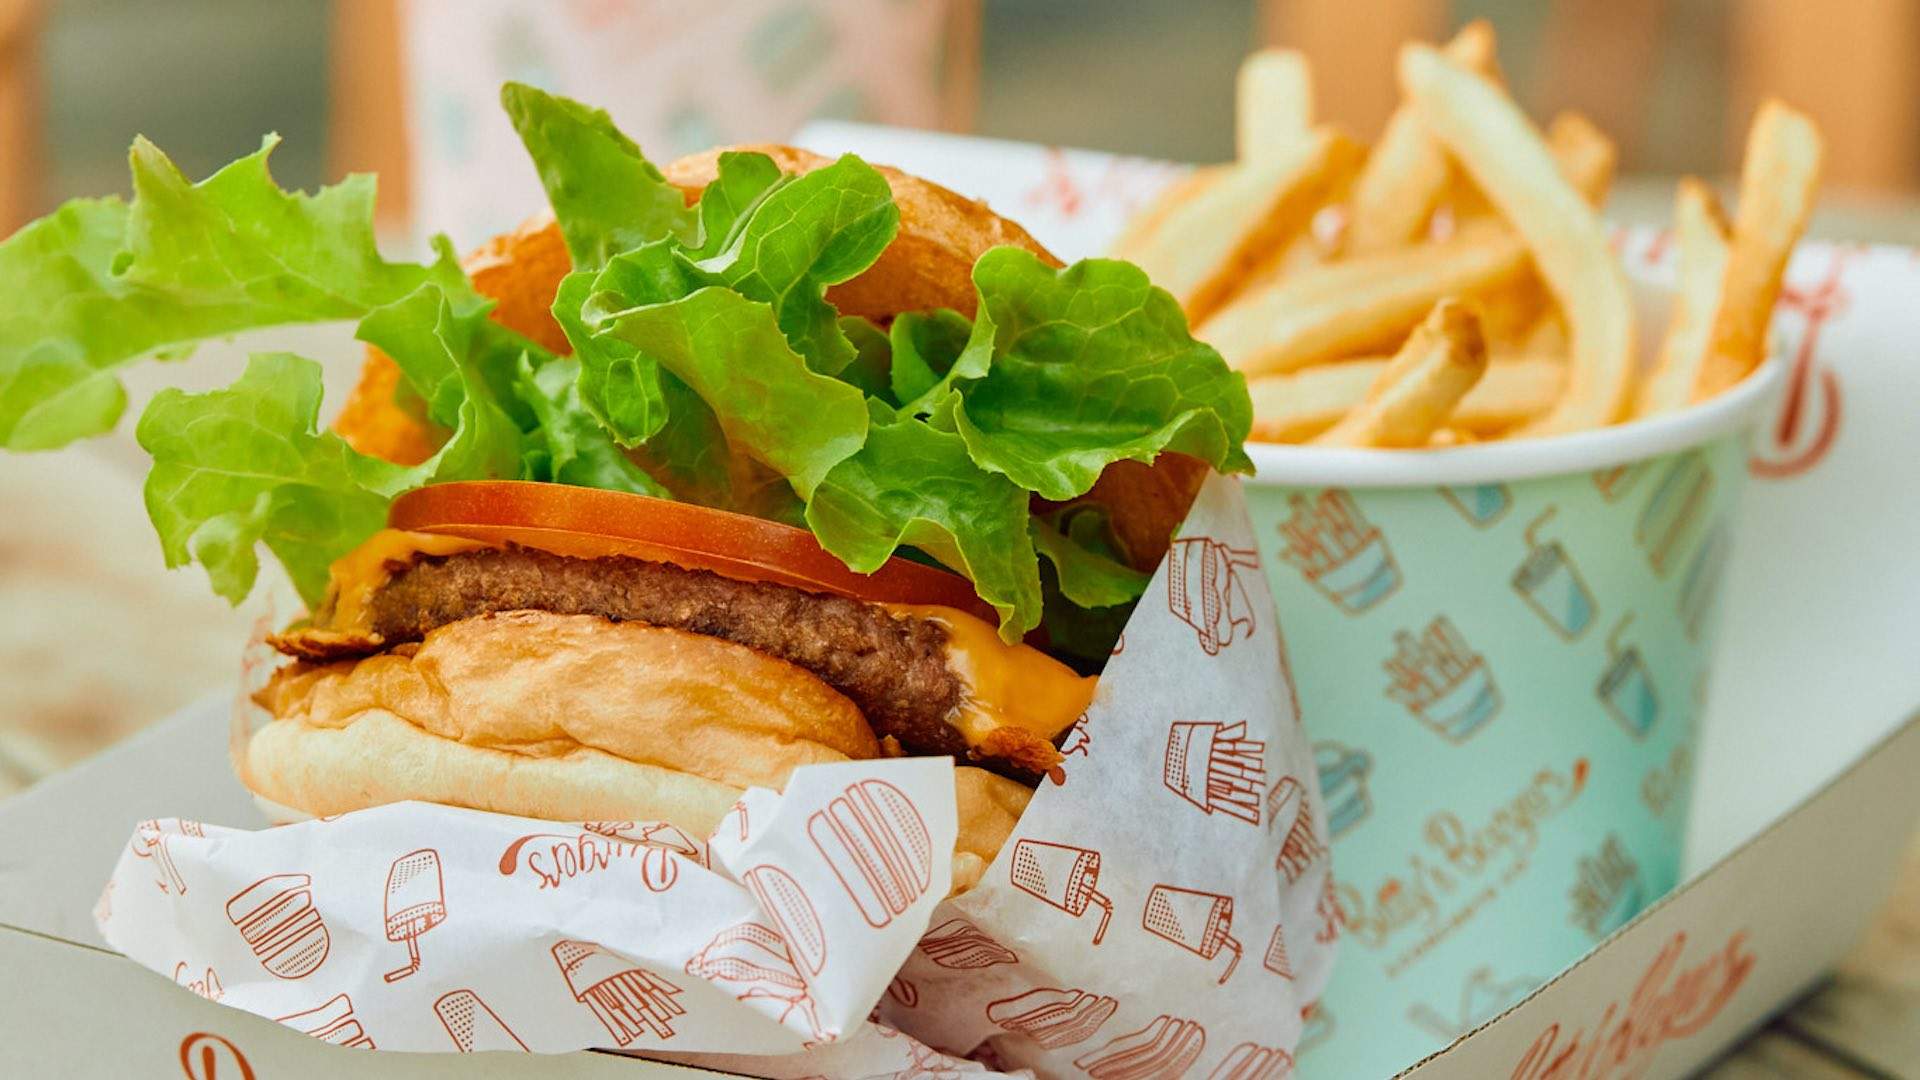 Celebrate National Burger Day with $15 Burger Bundles at Betty's Burgers